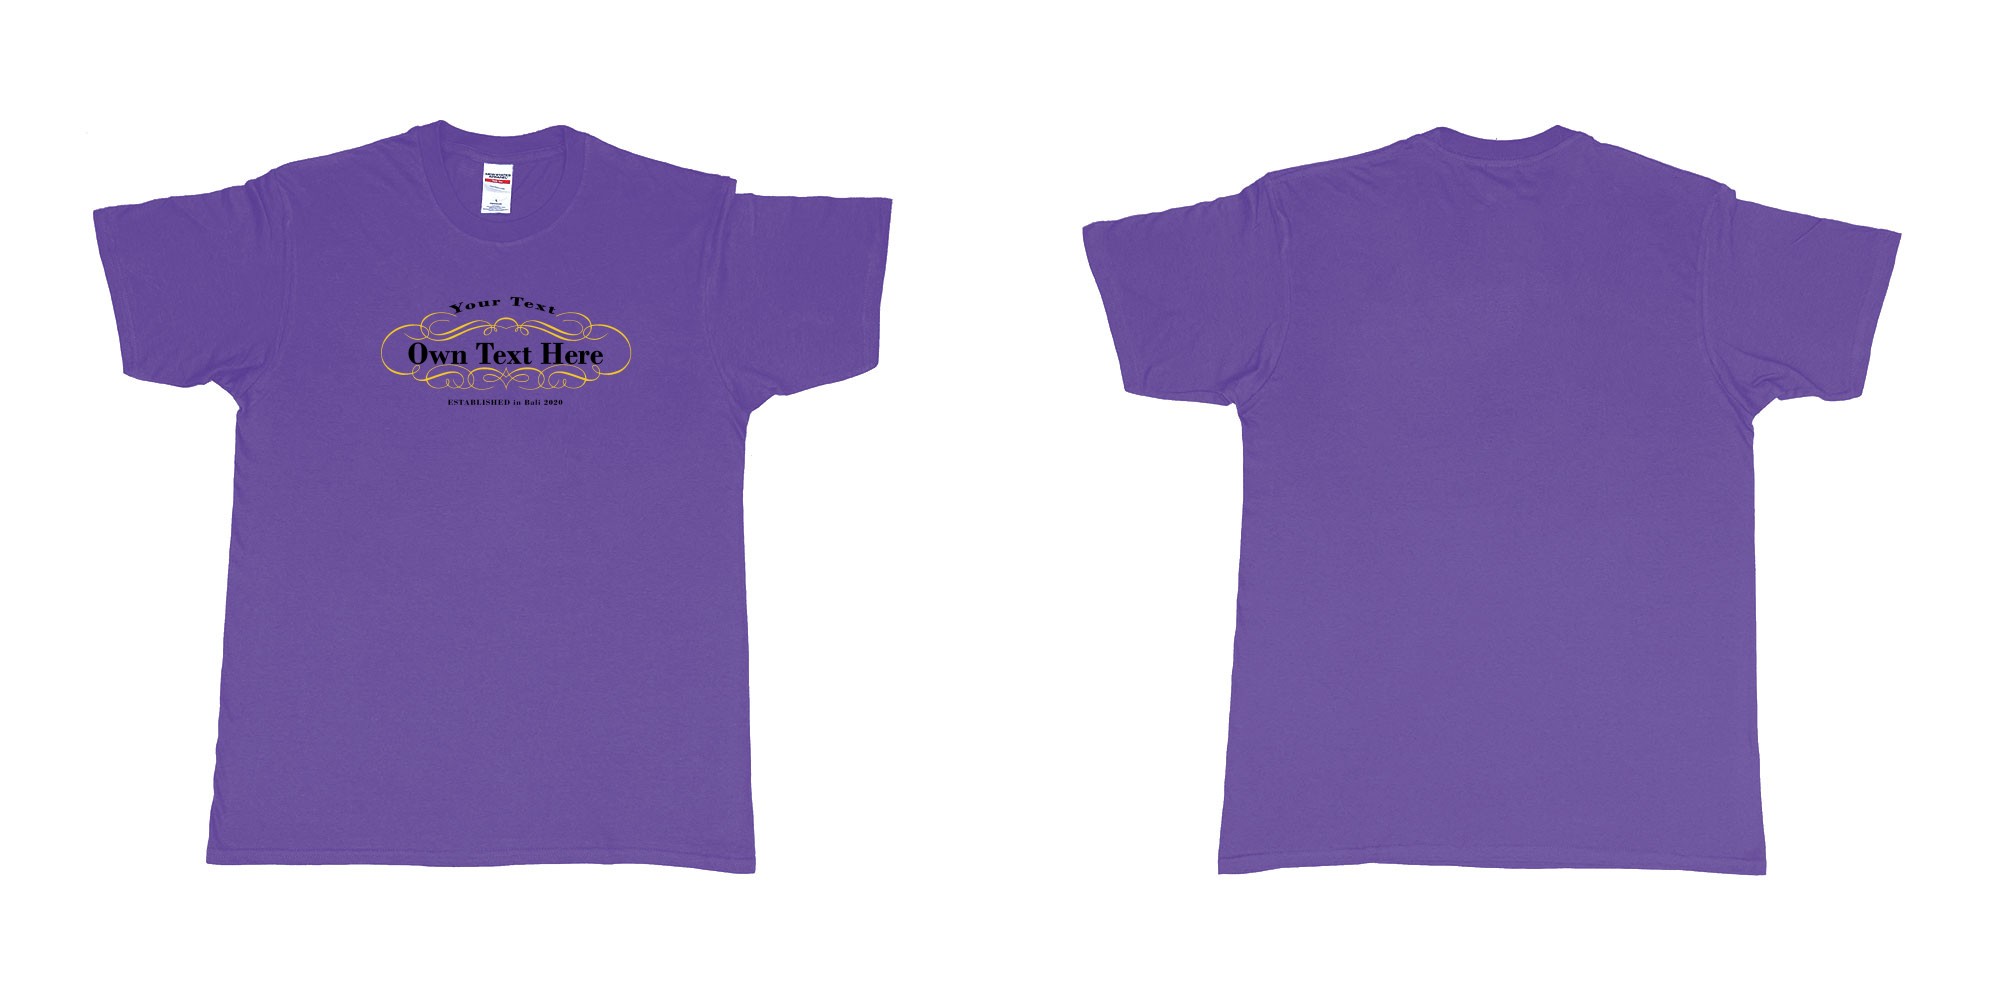 Custom tshirt design Laurent perrier in fabric color purple choice your own text made in Bali by The Pirate Way